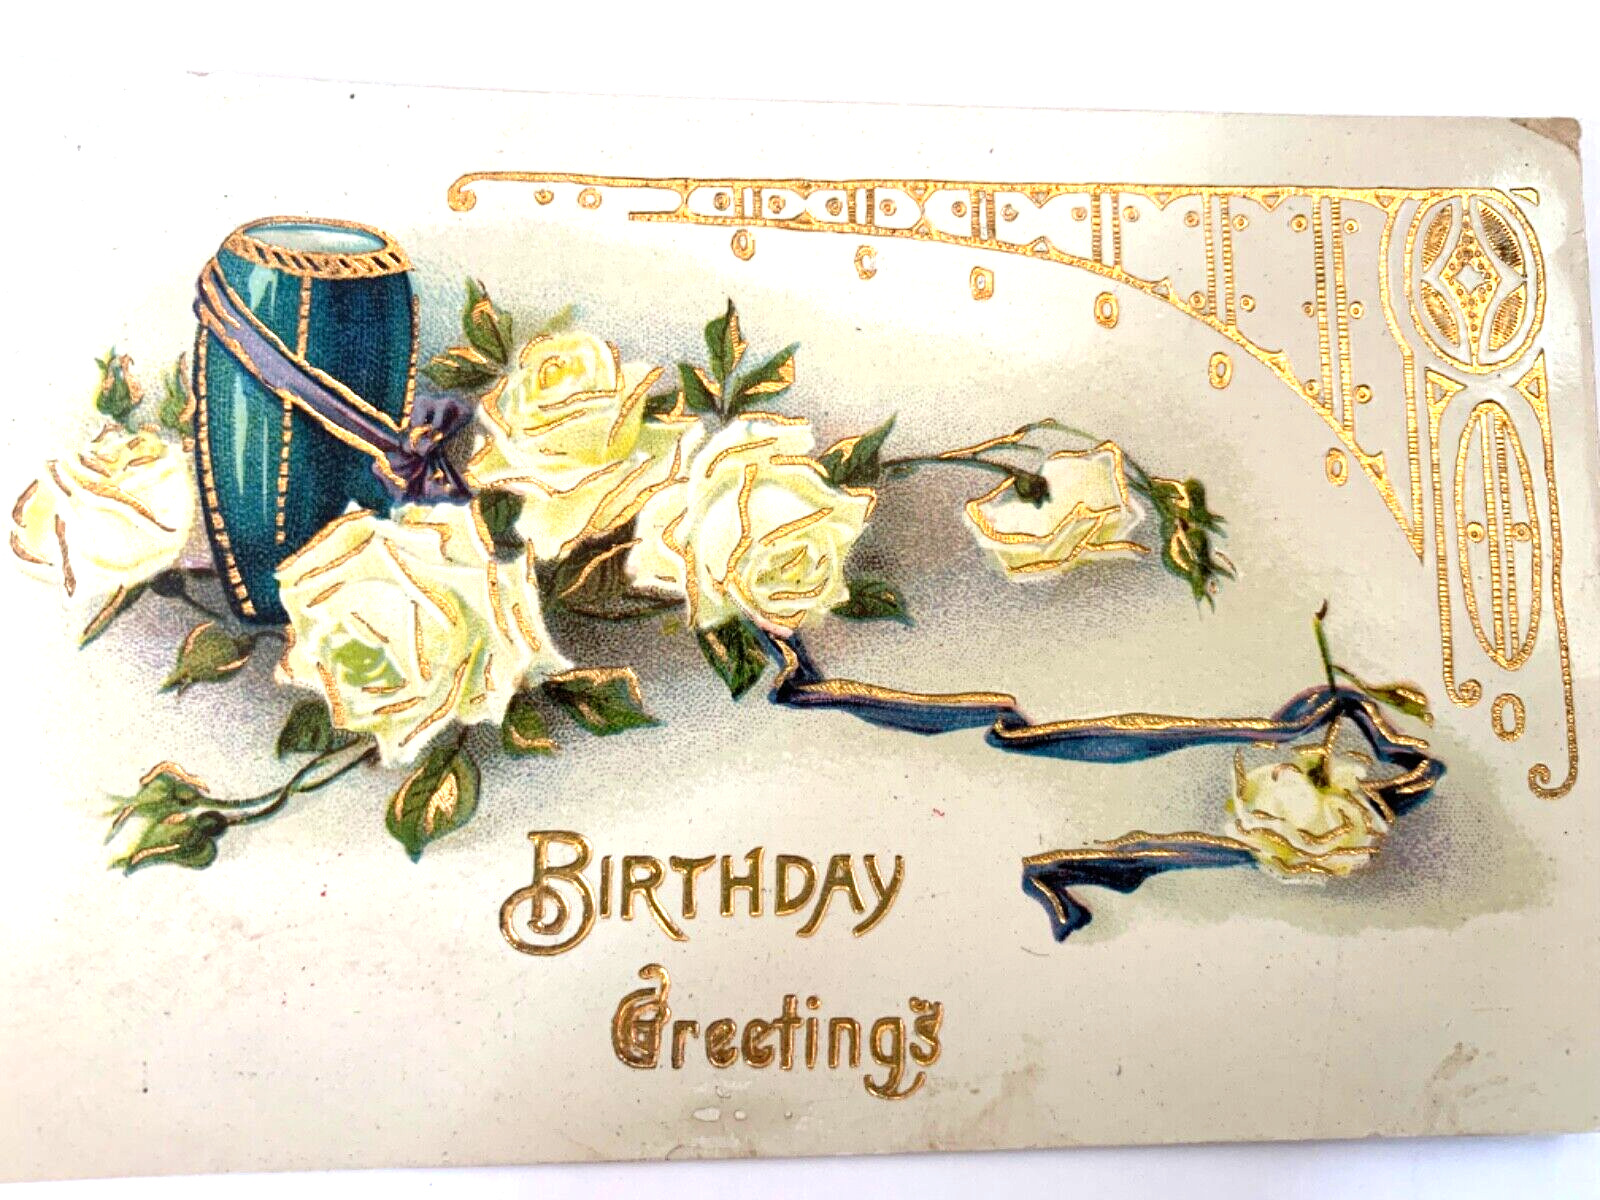 Postcard Antique Birthday Greetings 1915 White Roses Germany Postmarked Stamp